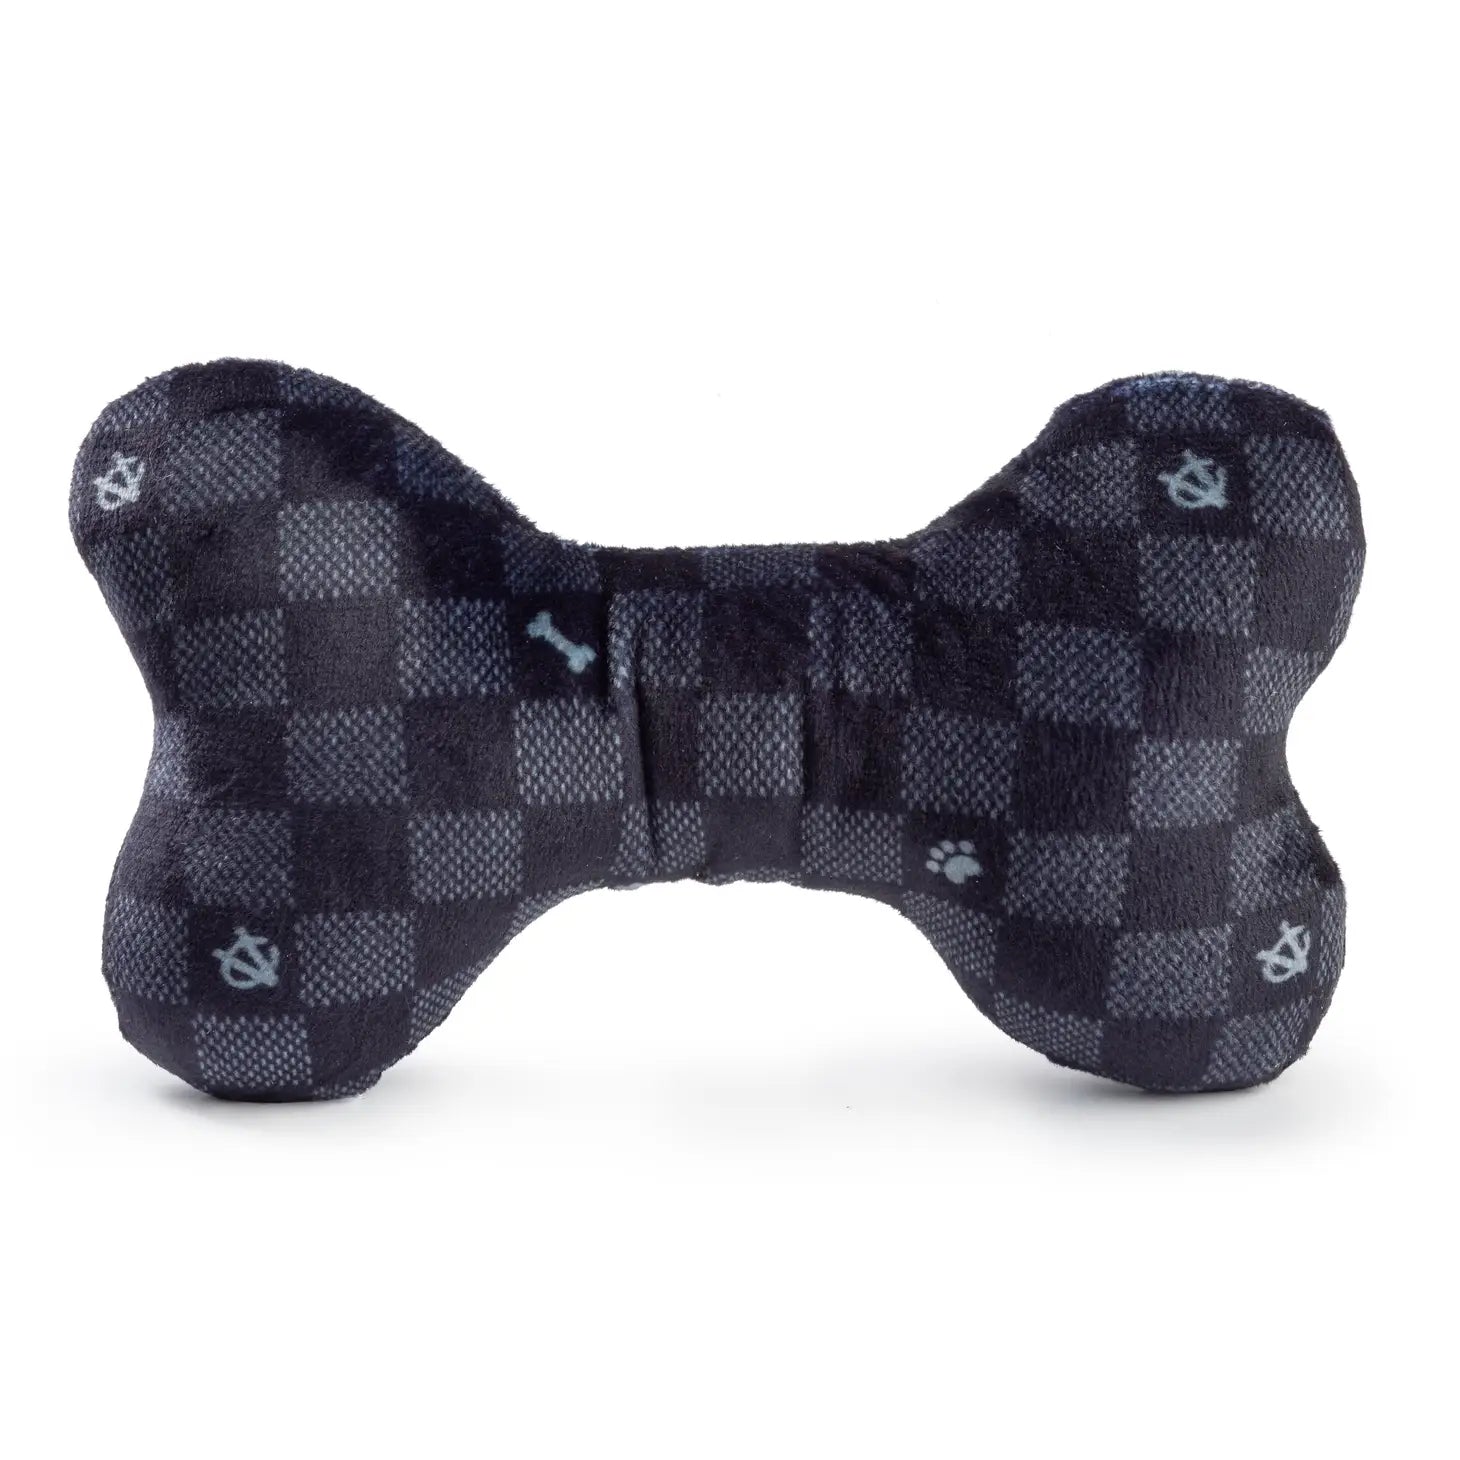 Good Gift Delivered — Checker Chewy Vuiton Dog Toy